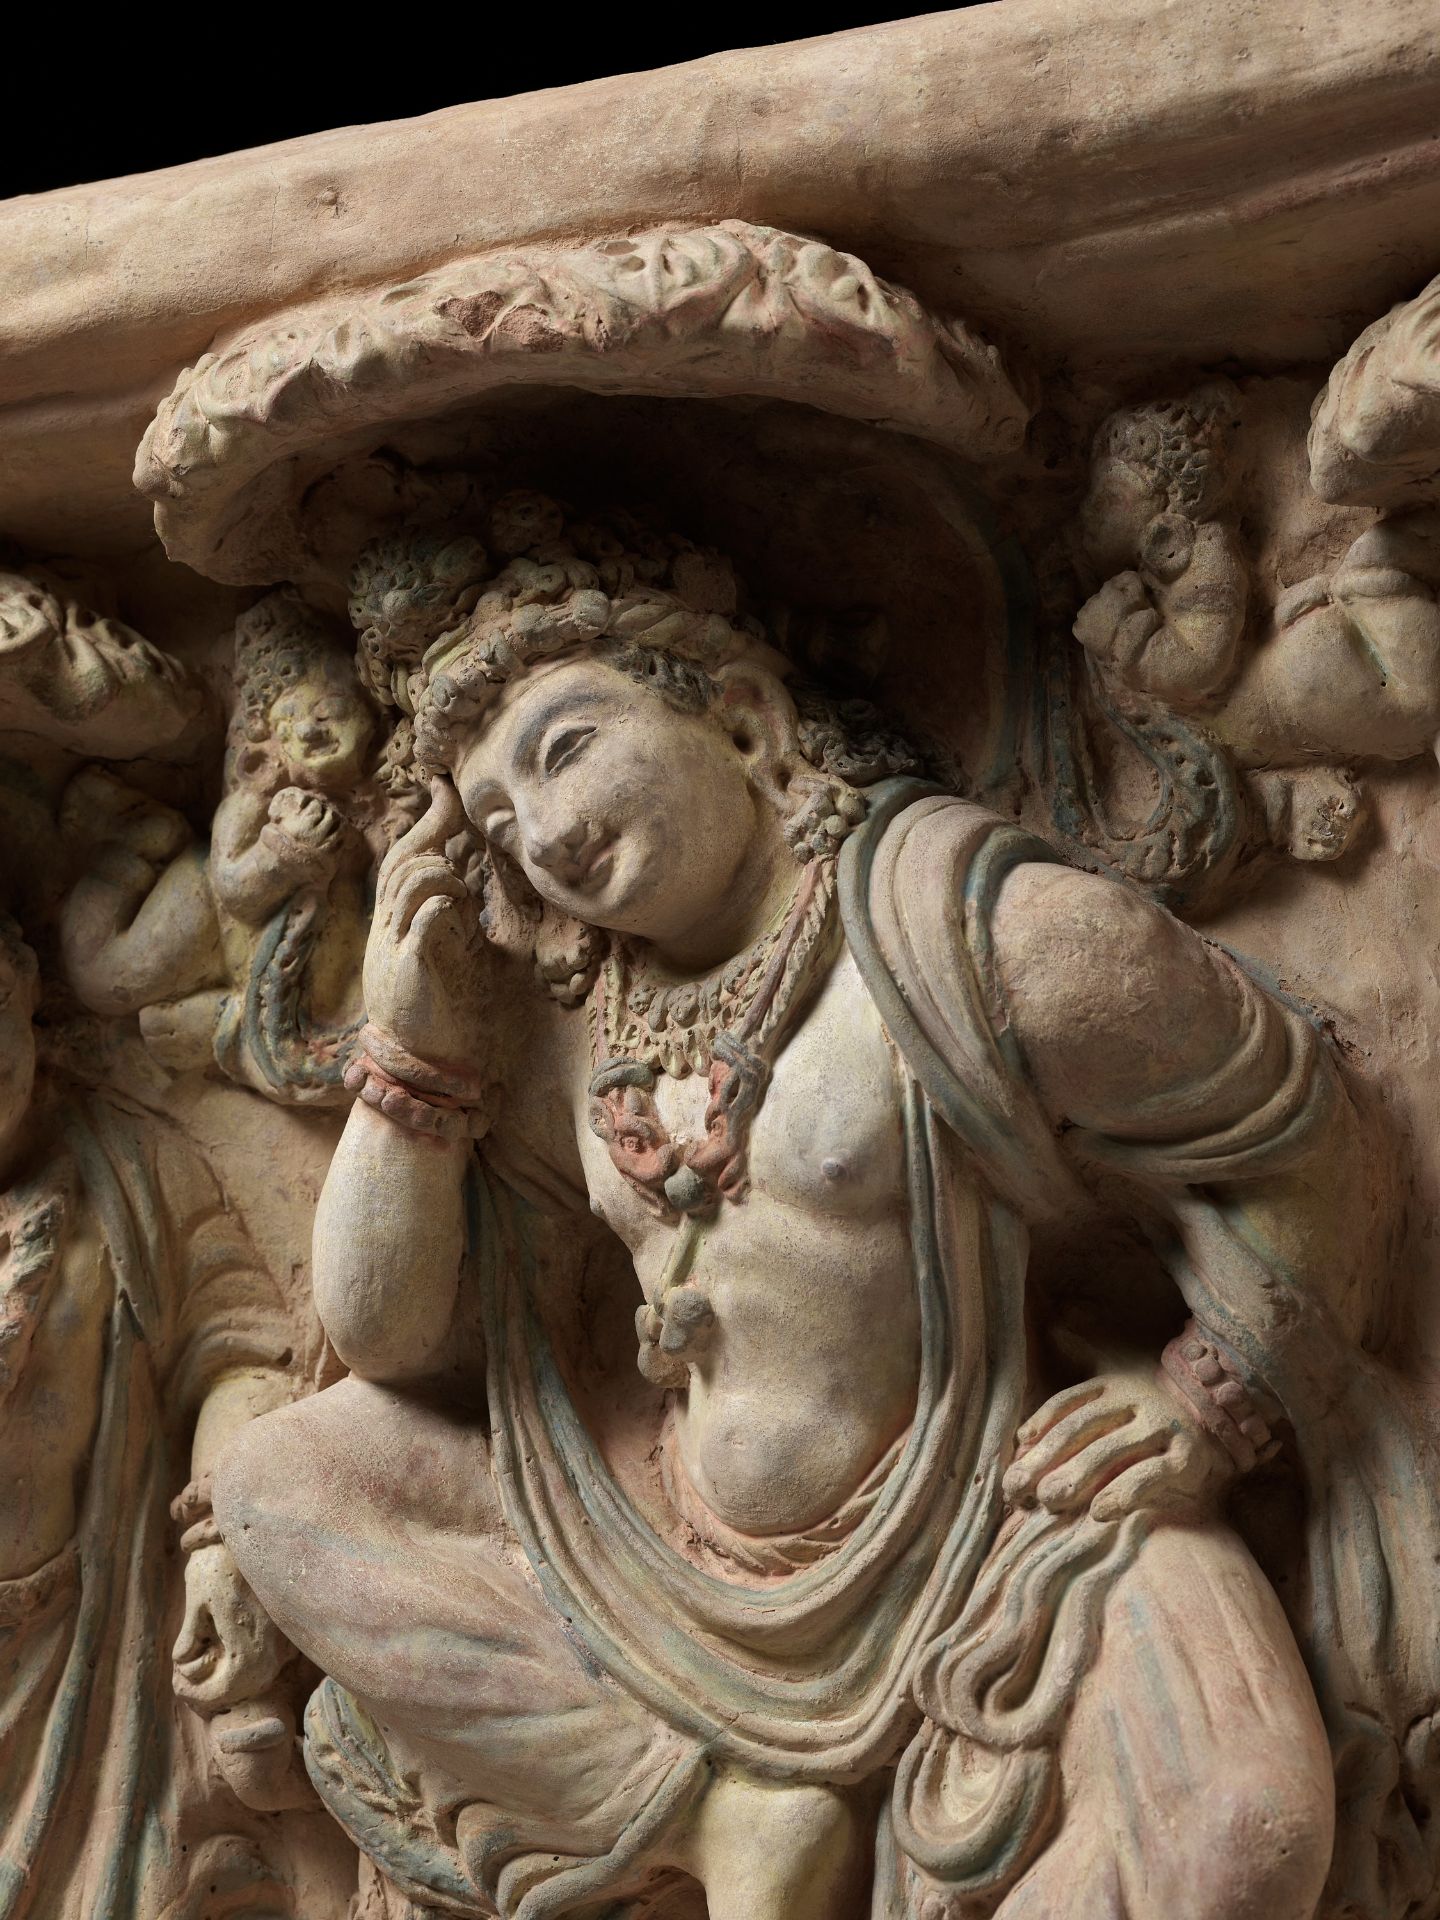 A TERRACOTTA RELIEF OF A THINKING PRINCE SIDDHARTA UNDER THE BODHI TREE, ANCIENT REGION OF GANDHARA - Image 3 of 19